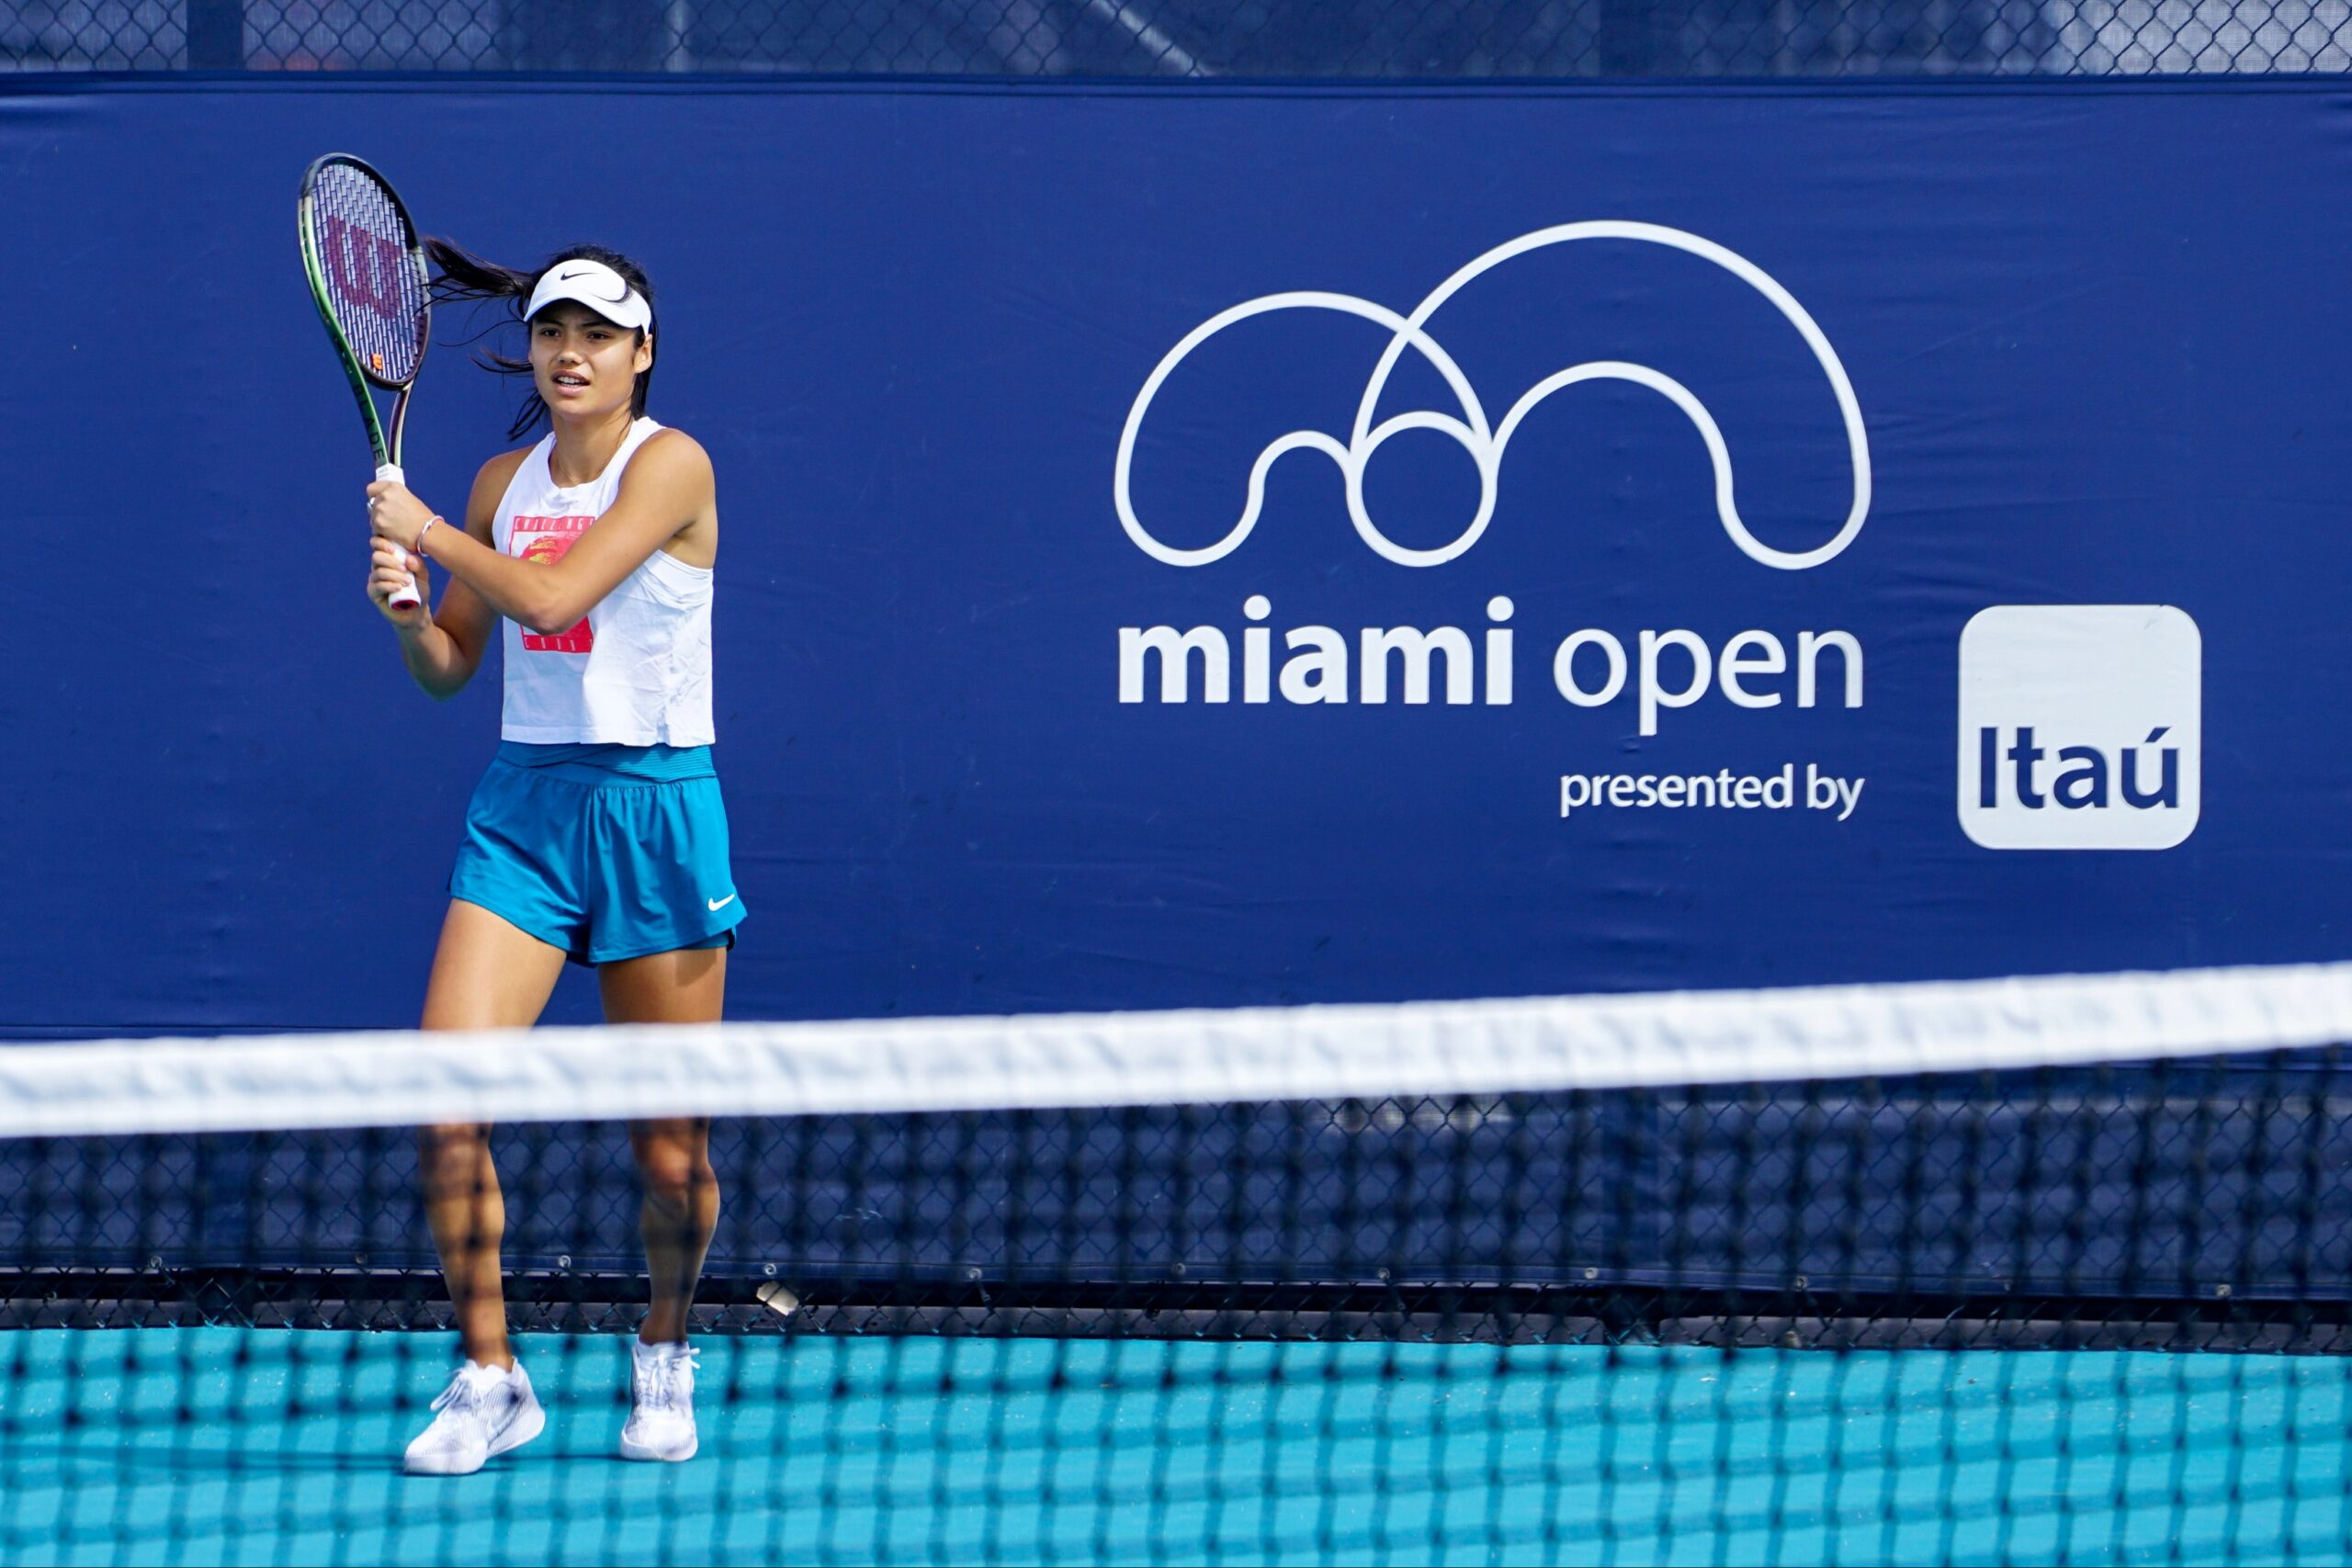 US Open Champions Dominic Thiem and Emma Raducanu Named 2023 Miami Open Presented by Itaú First